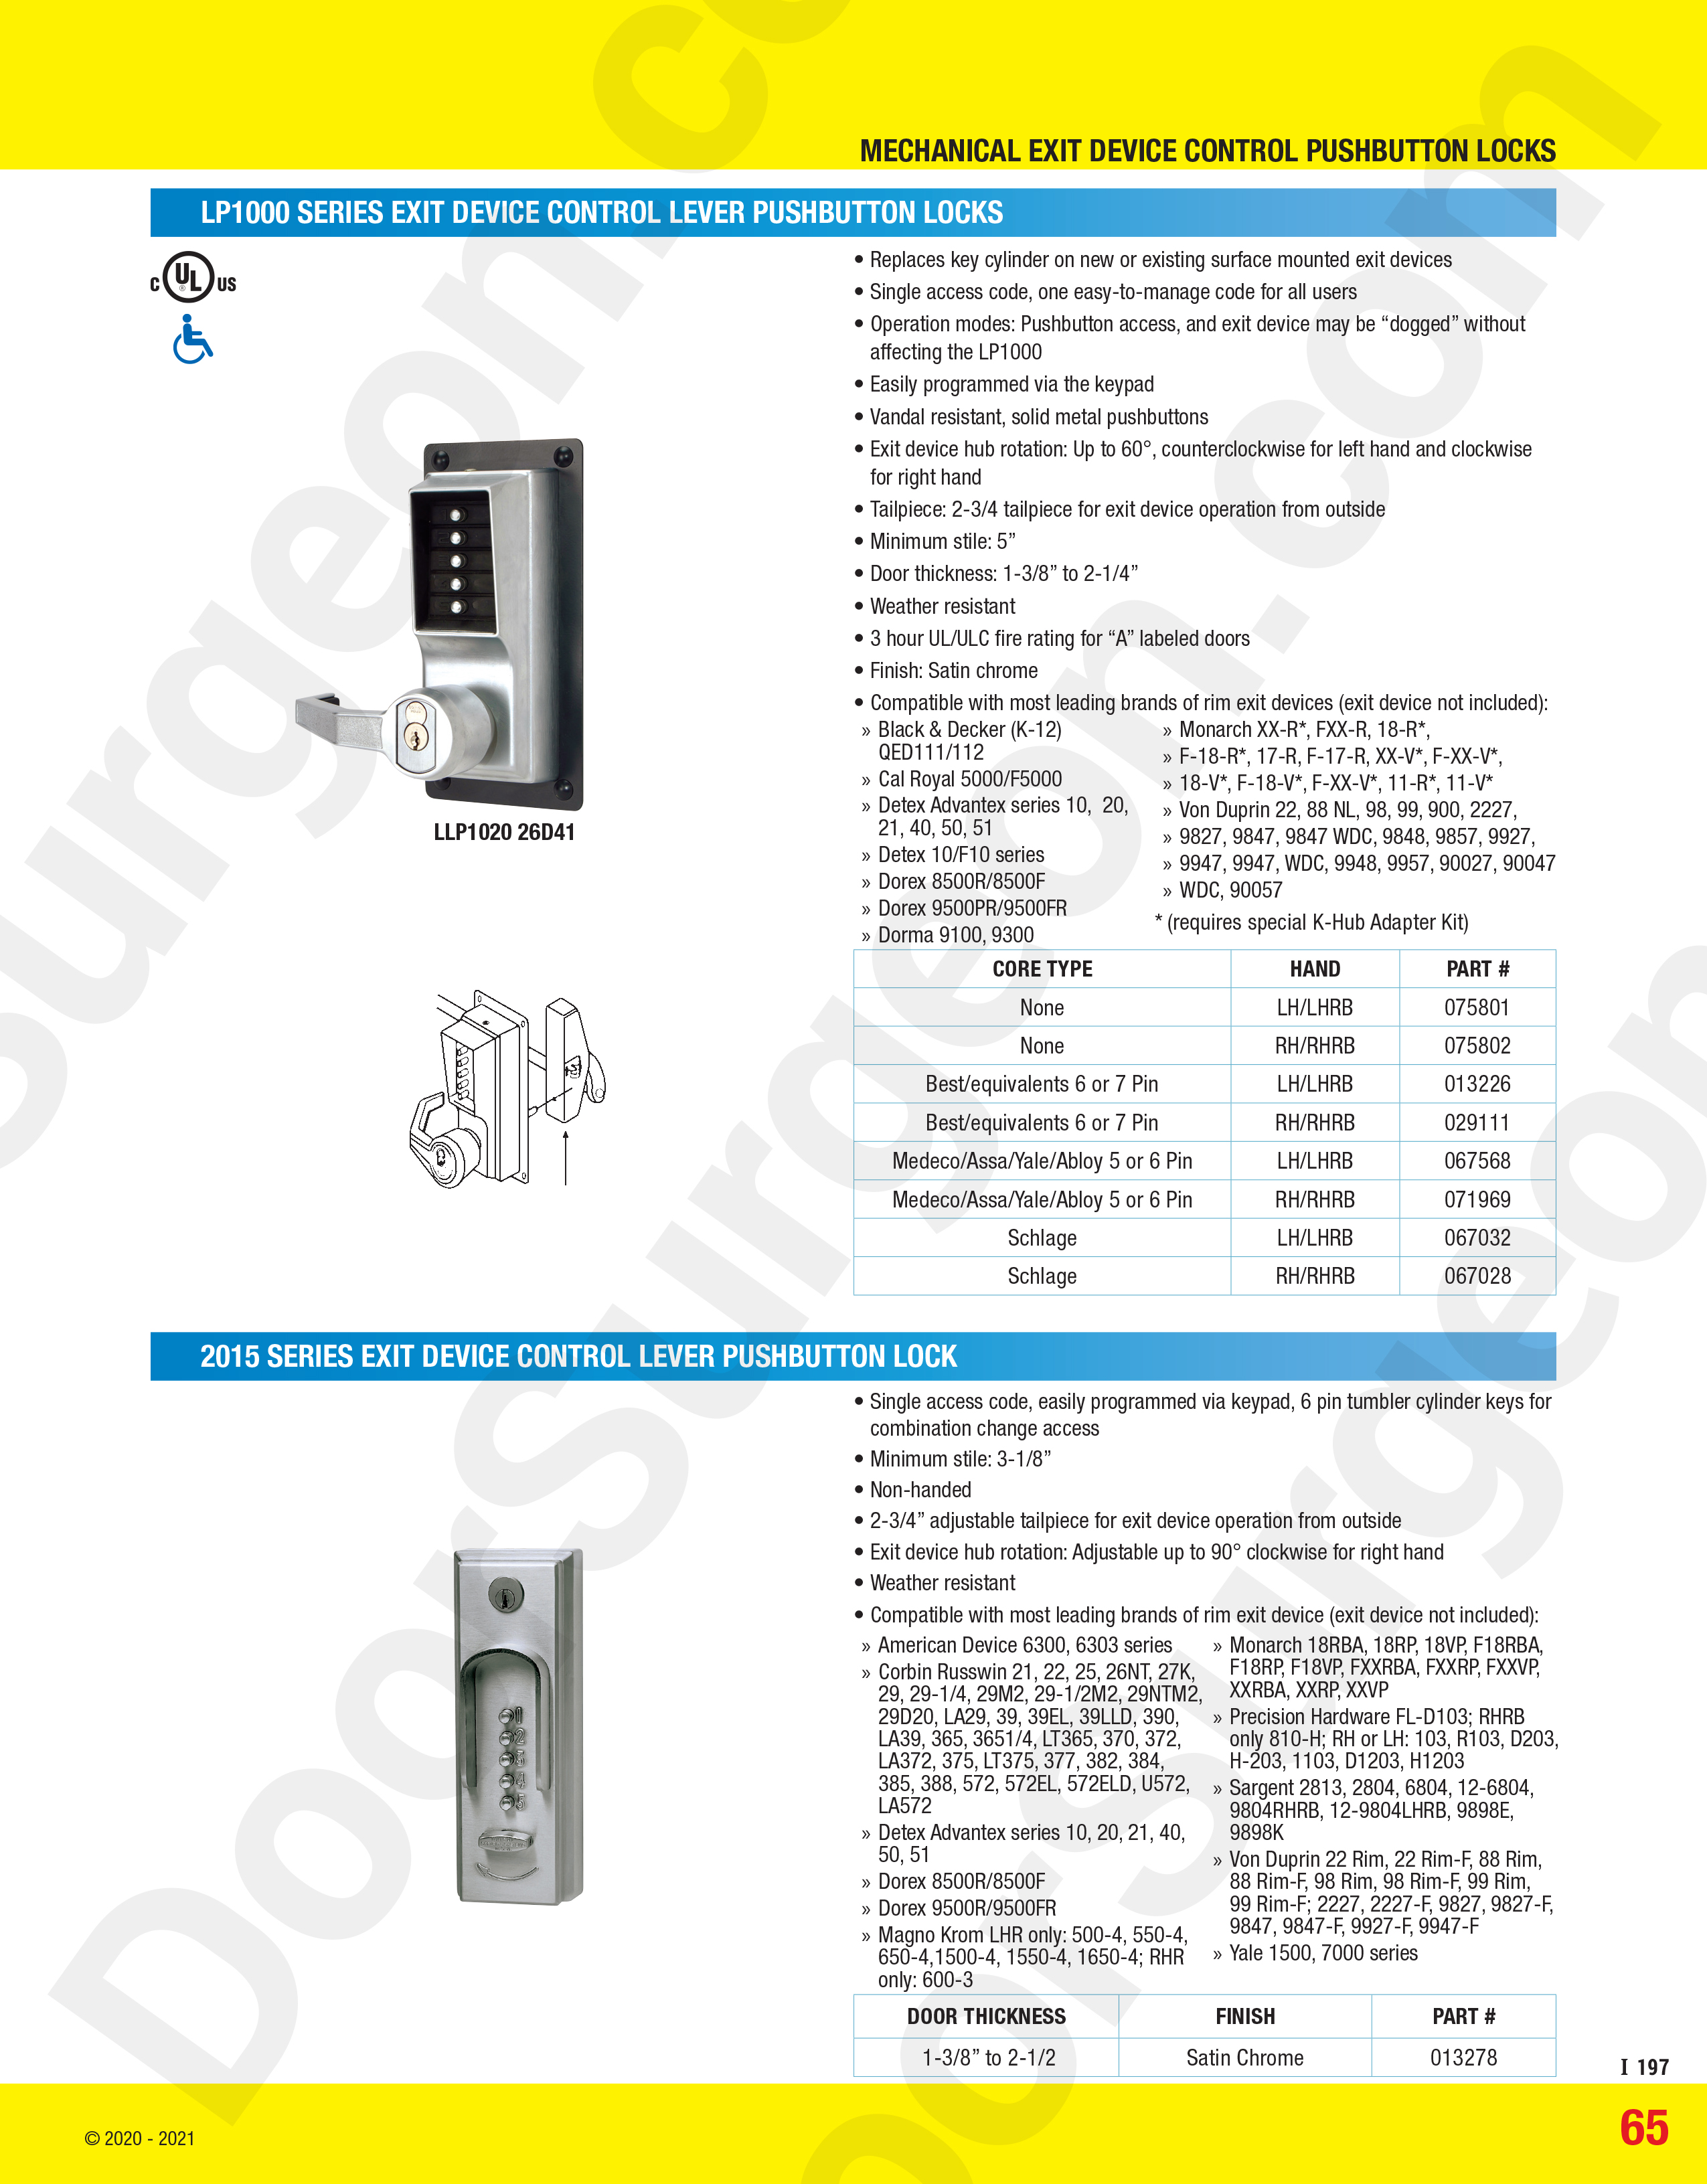 Simplex Dormakaba LP1000 series exit device control lever push-button lock for panic bars.